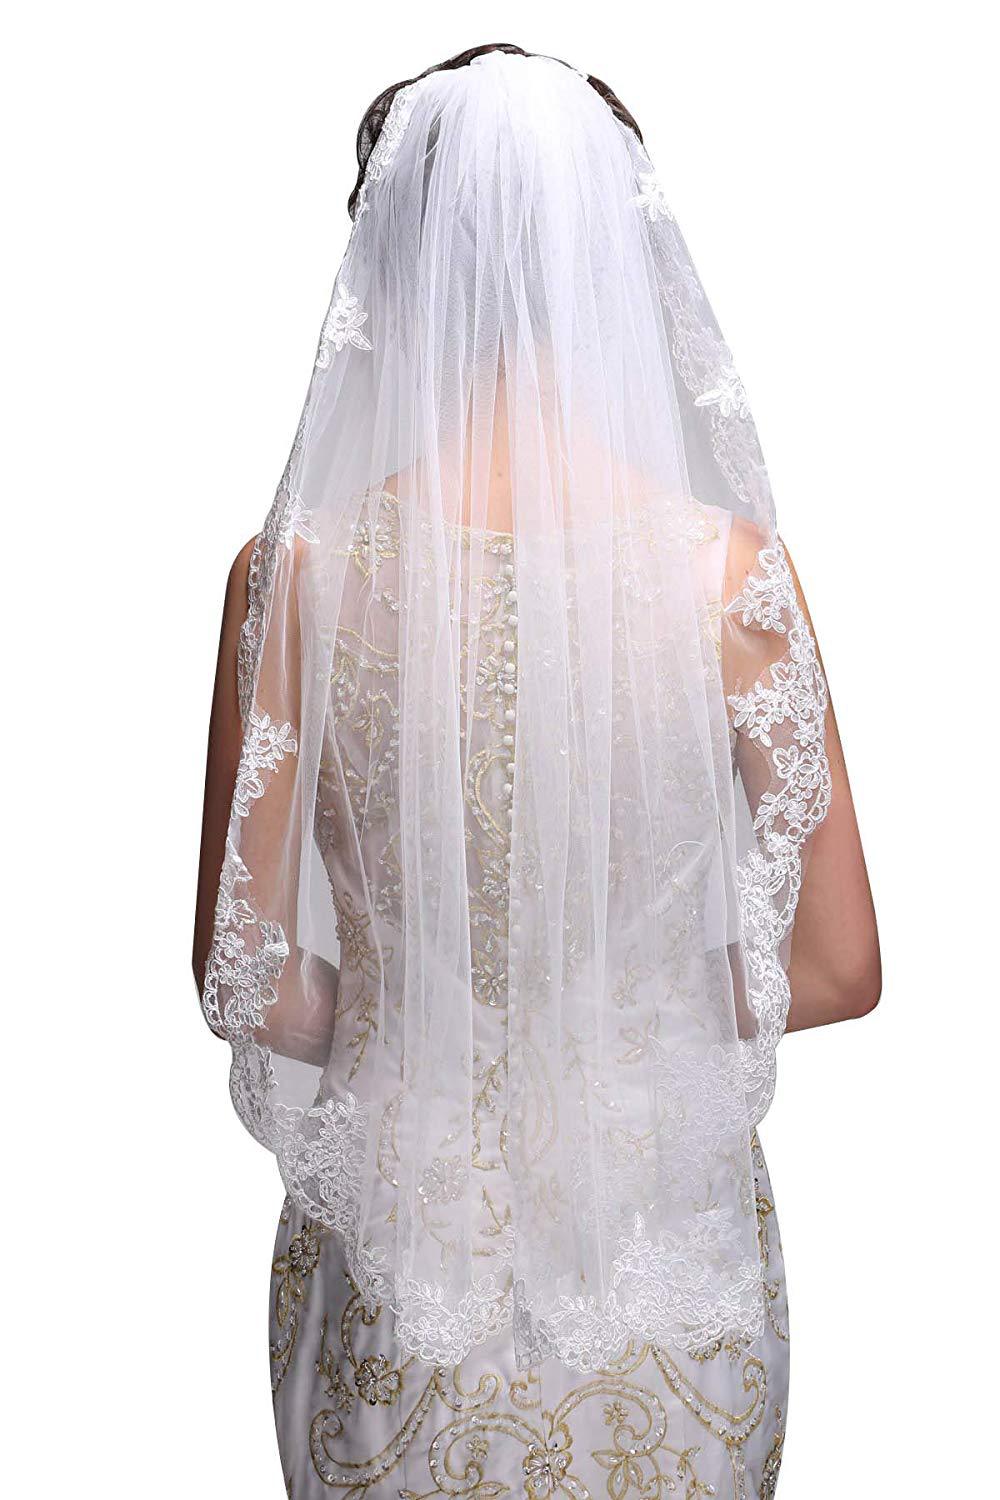 White Ivory Lace Edge Elbow Length Bridal Veil - TulleLux Bridal Crowns &  Accessories 